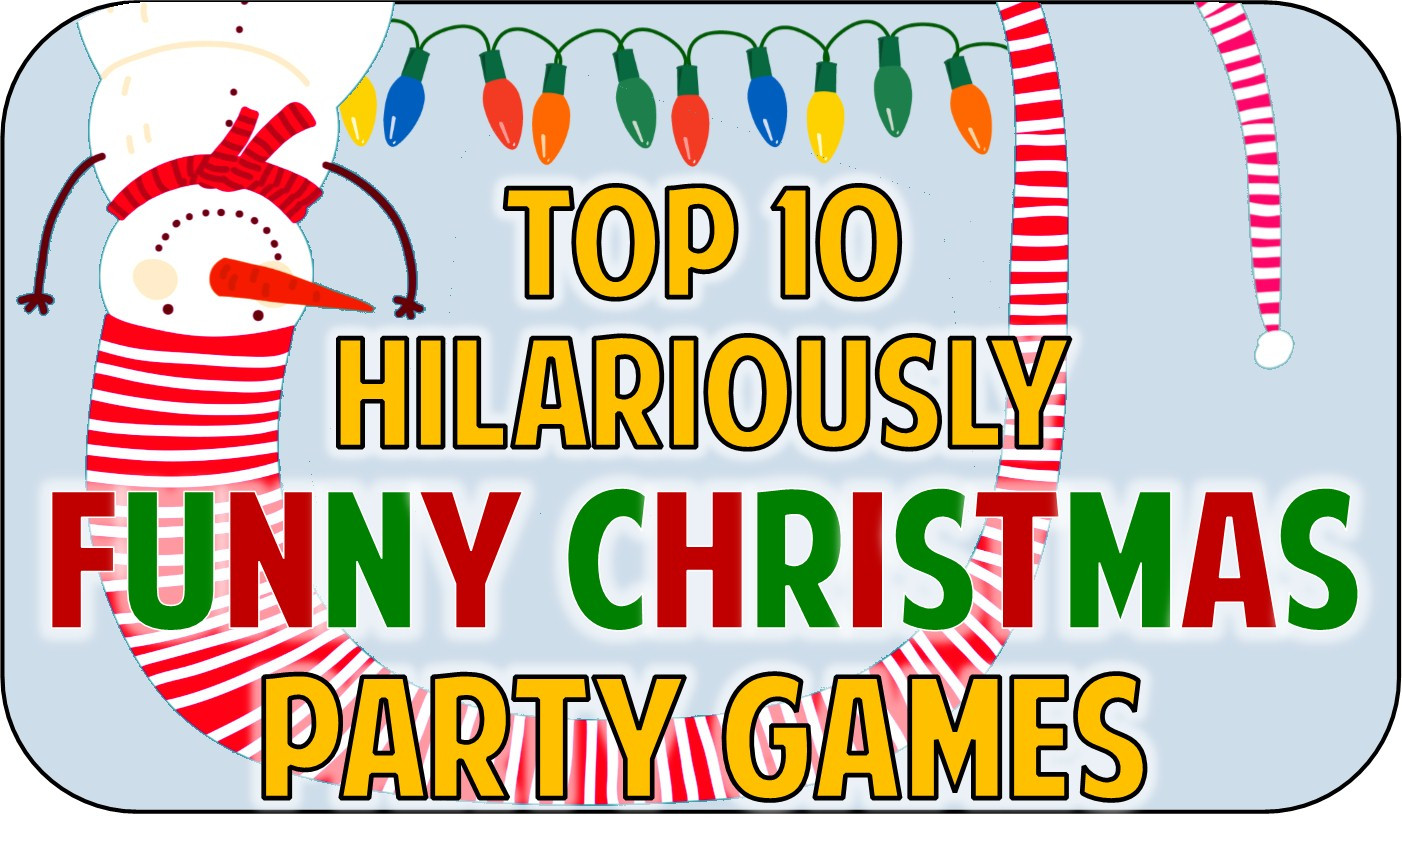 Fun Christmas Party Ideas For Adults
 Top 10 Funny Christmas Party Game Ideas